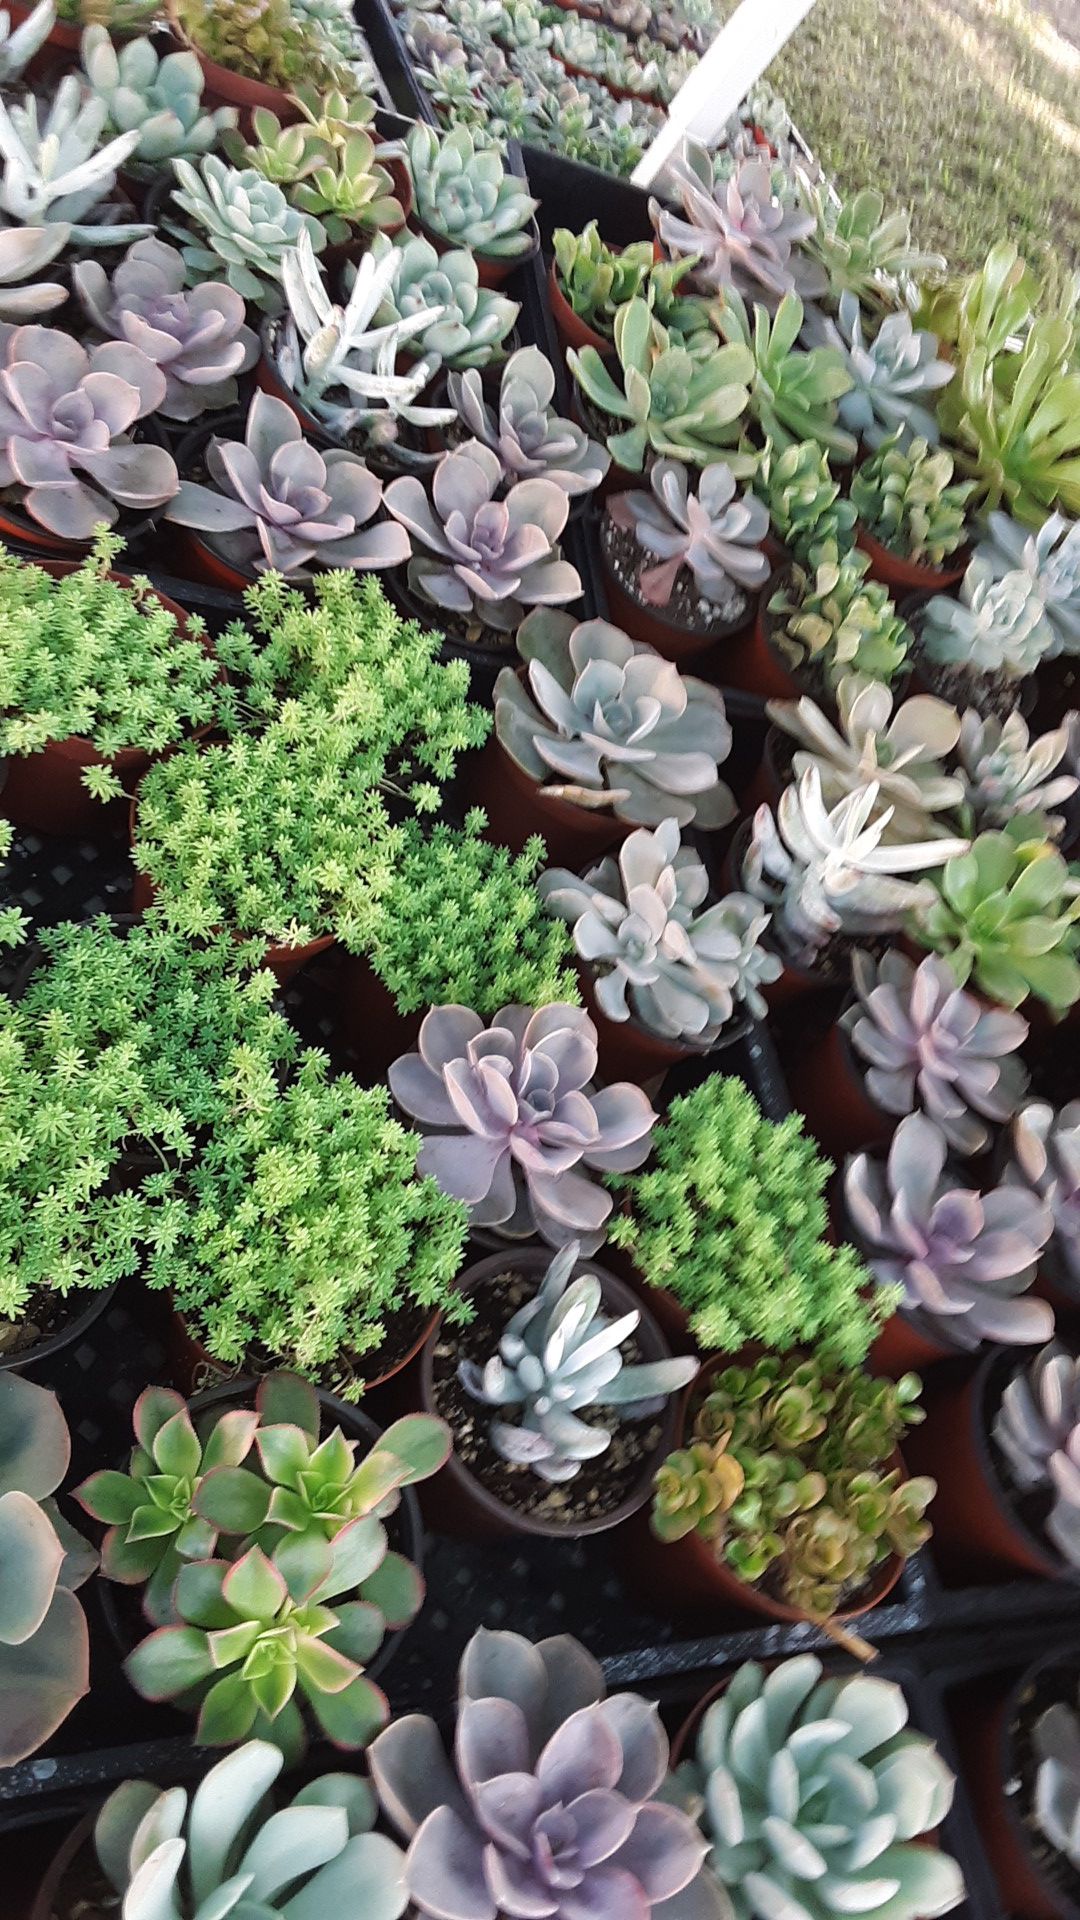 4" pots with succulent plants this week only $2.25 each